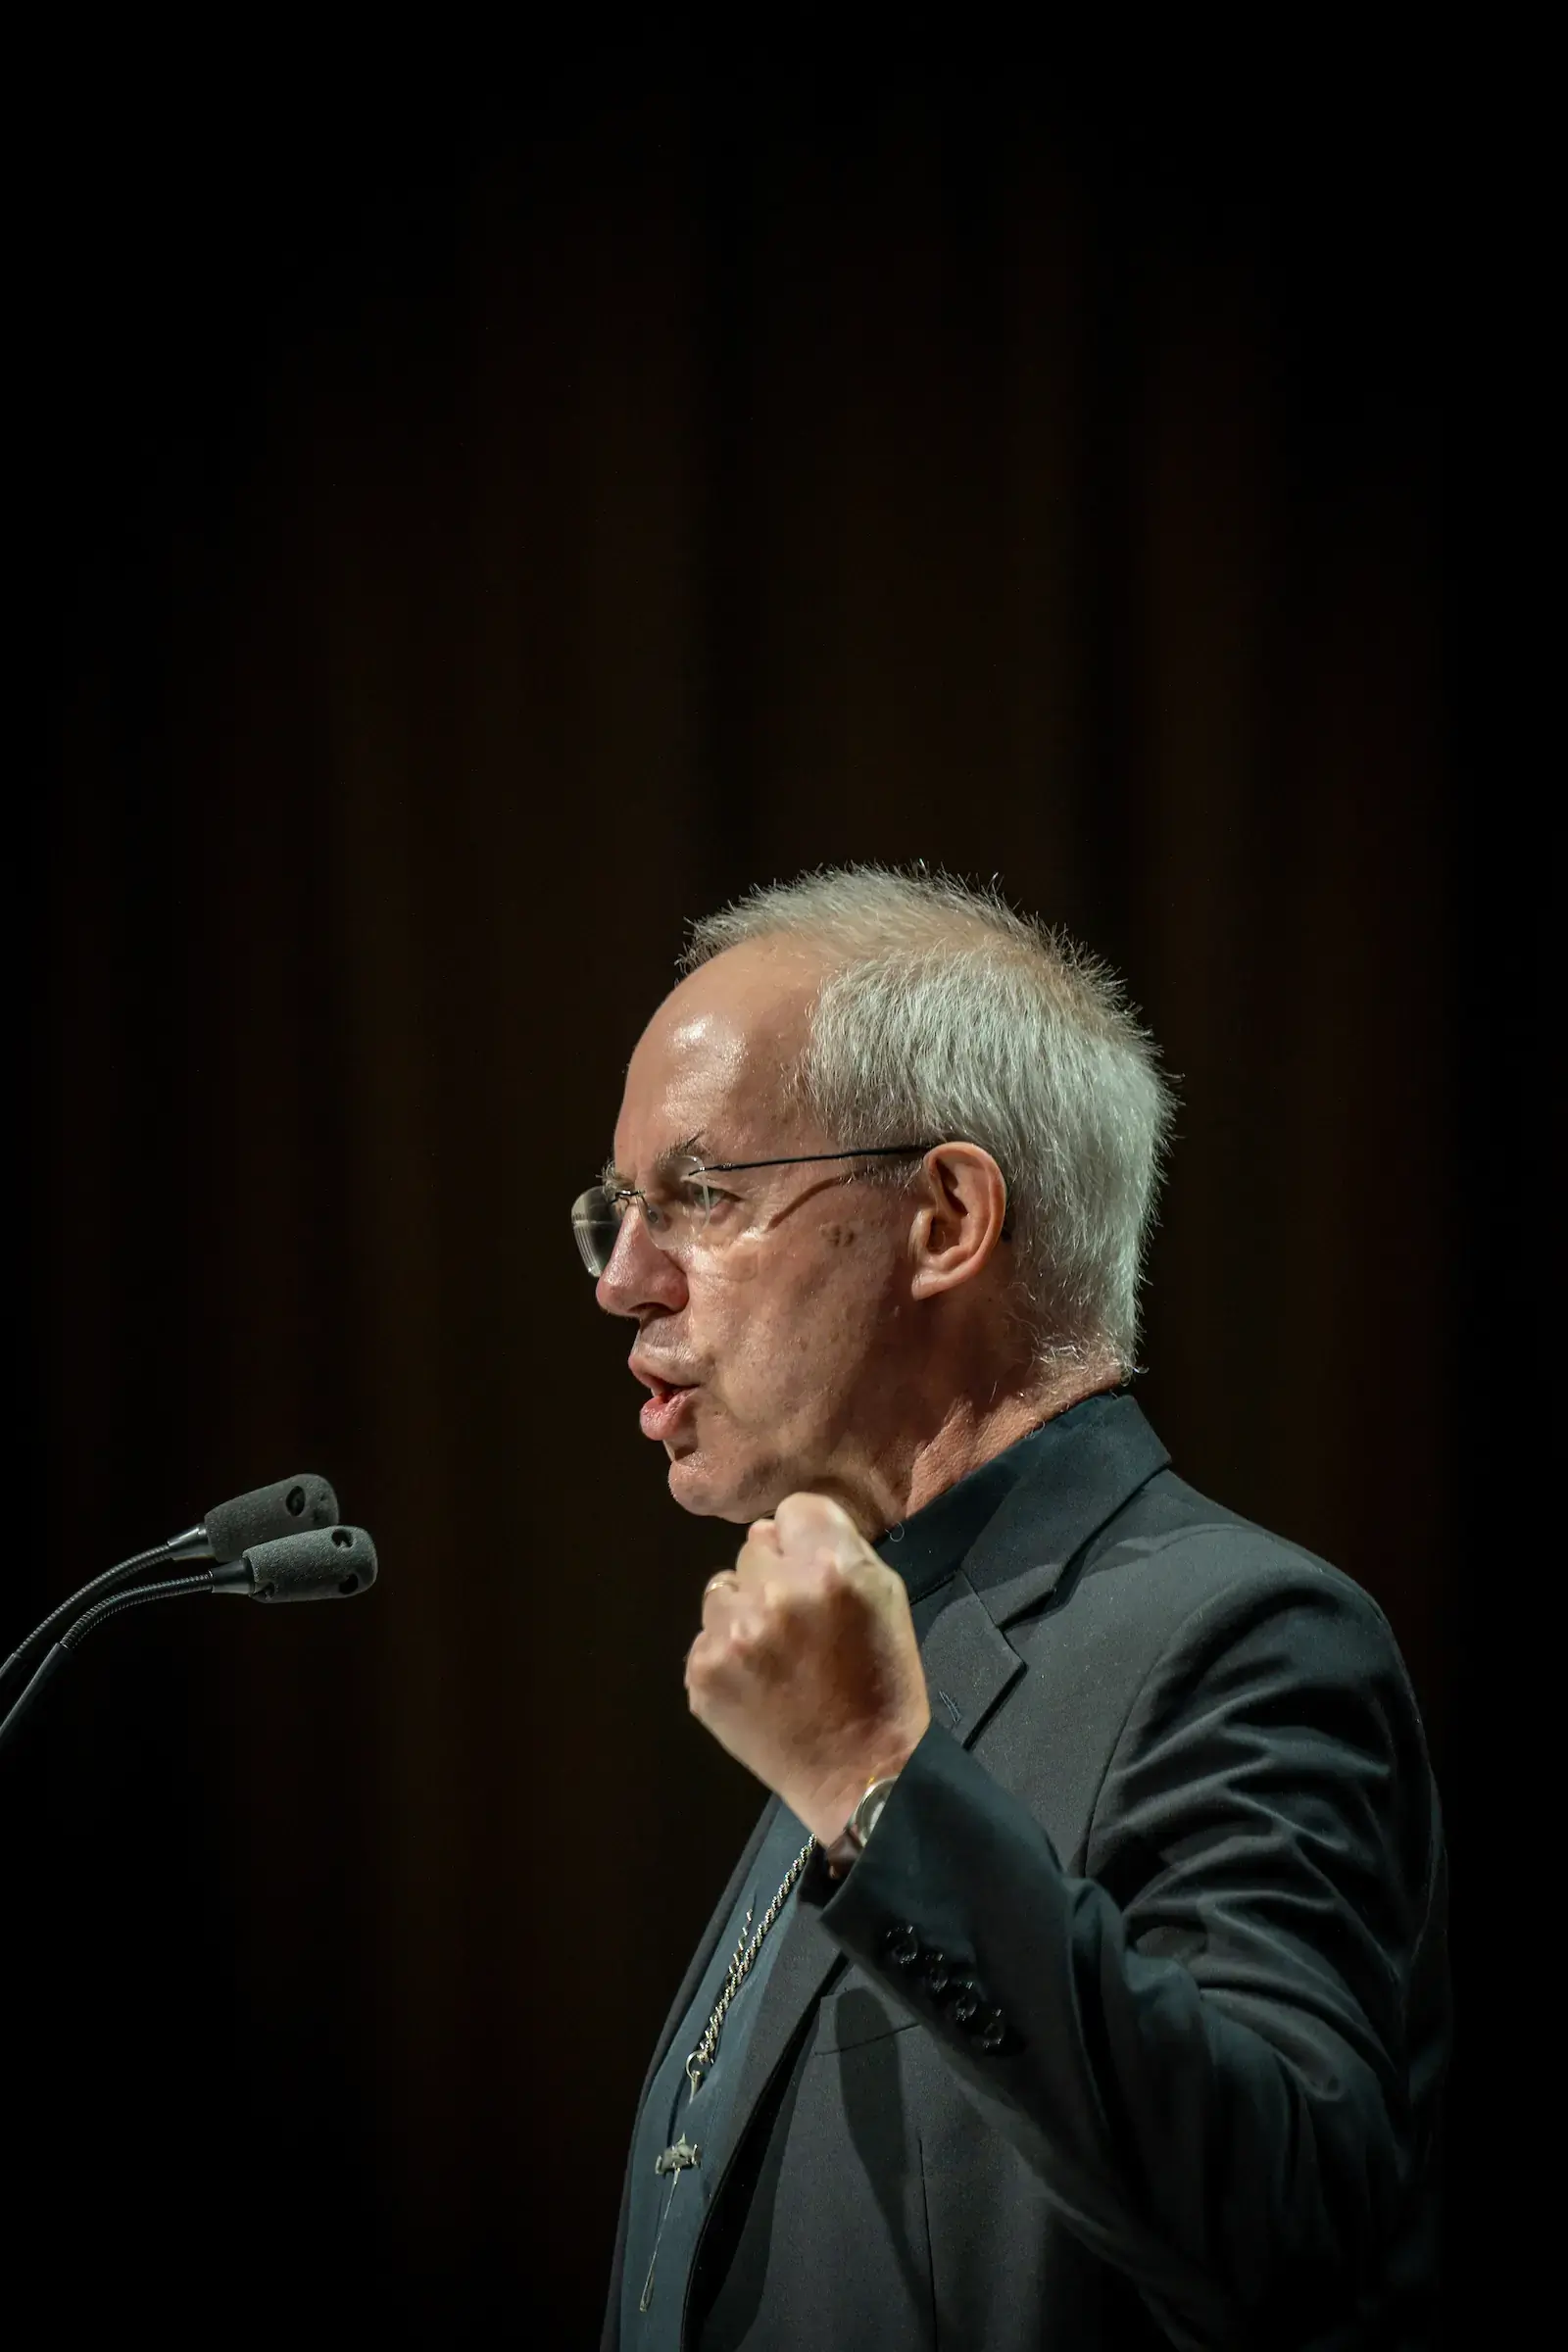 Archbishop of Canterbury Justin Welby addressed the WCC Assembly during the thematic plenary on Christian unity